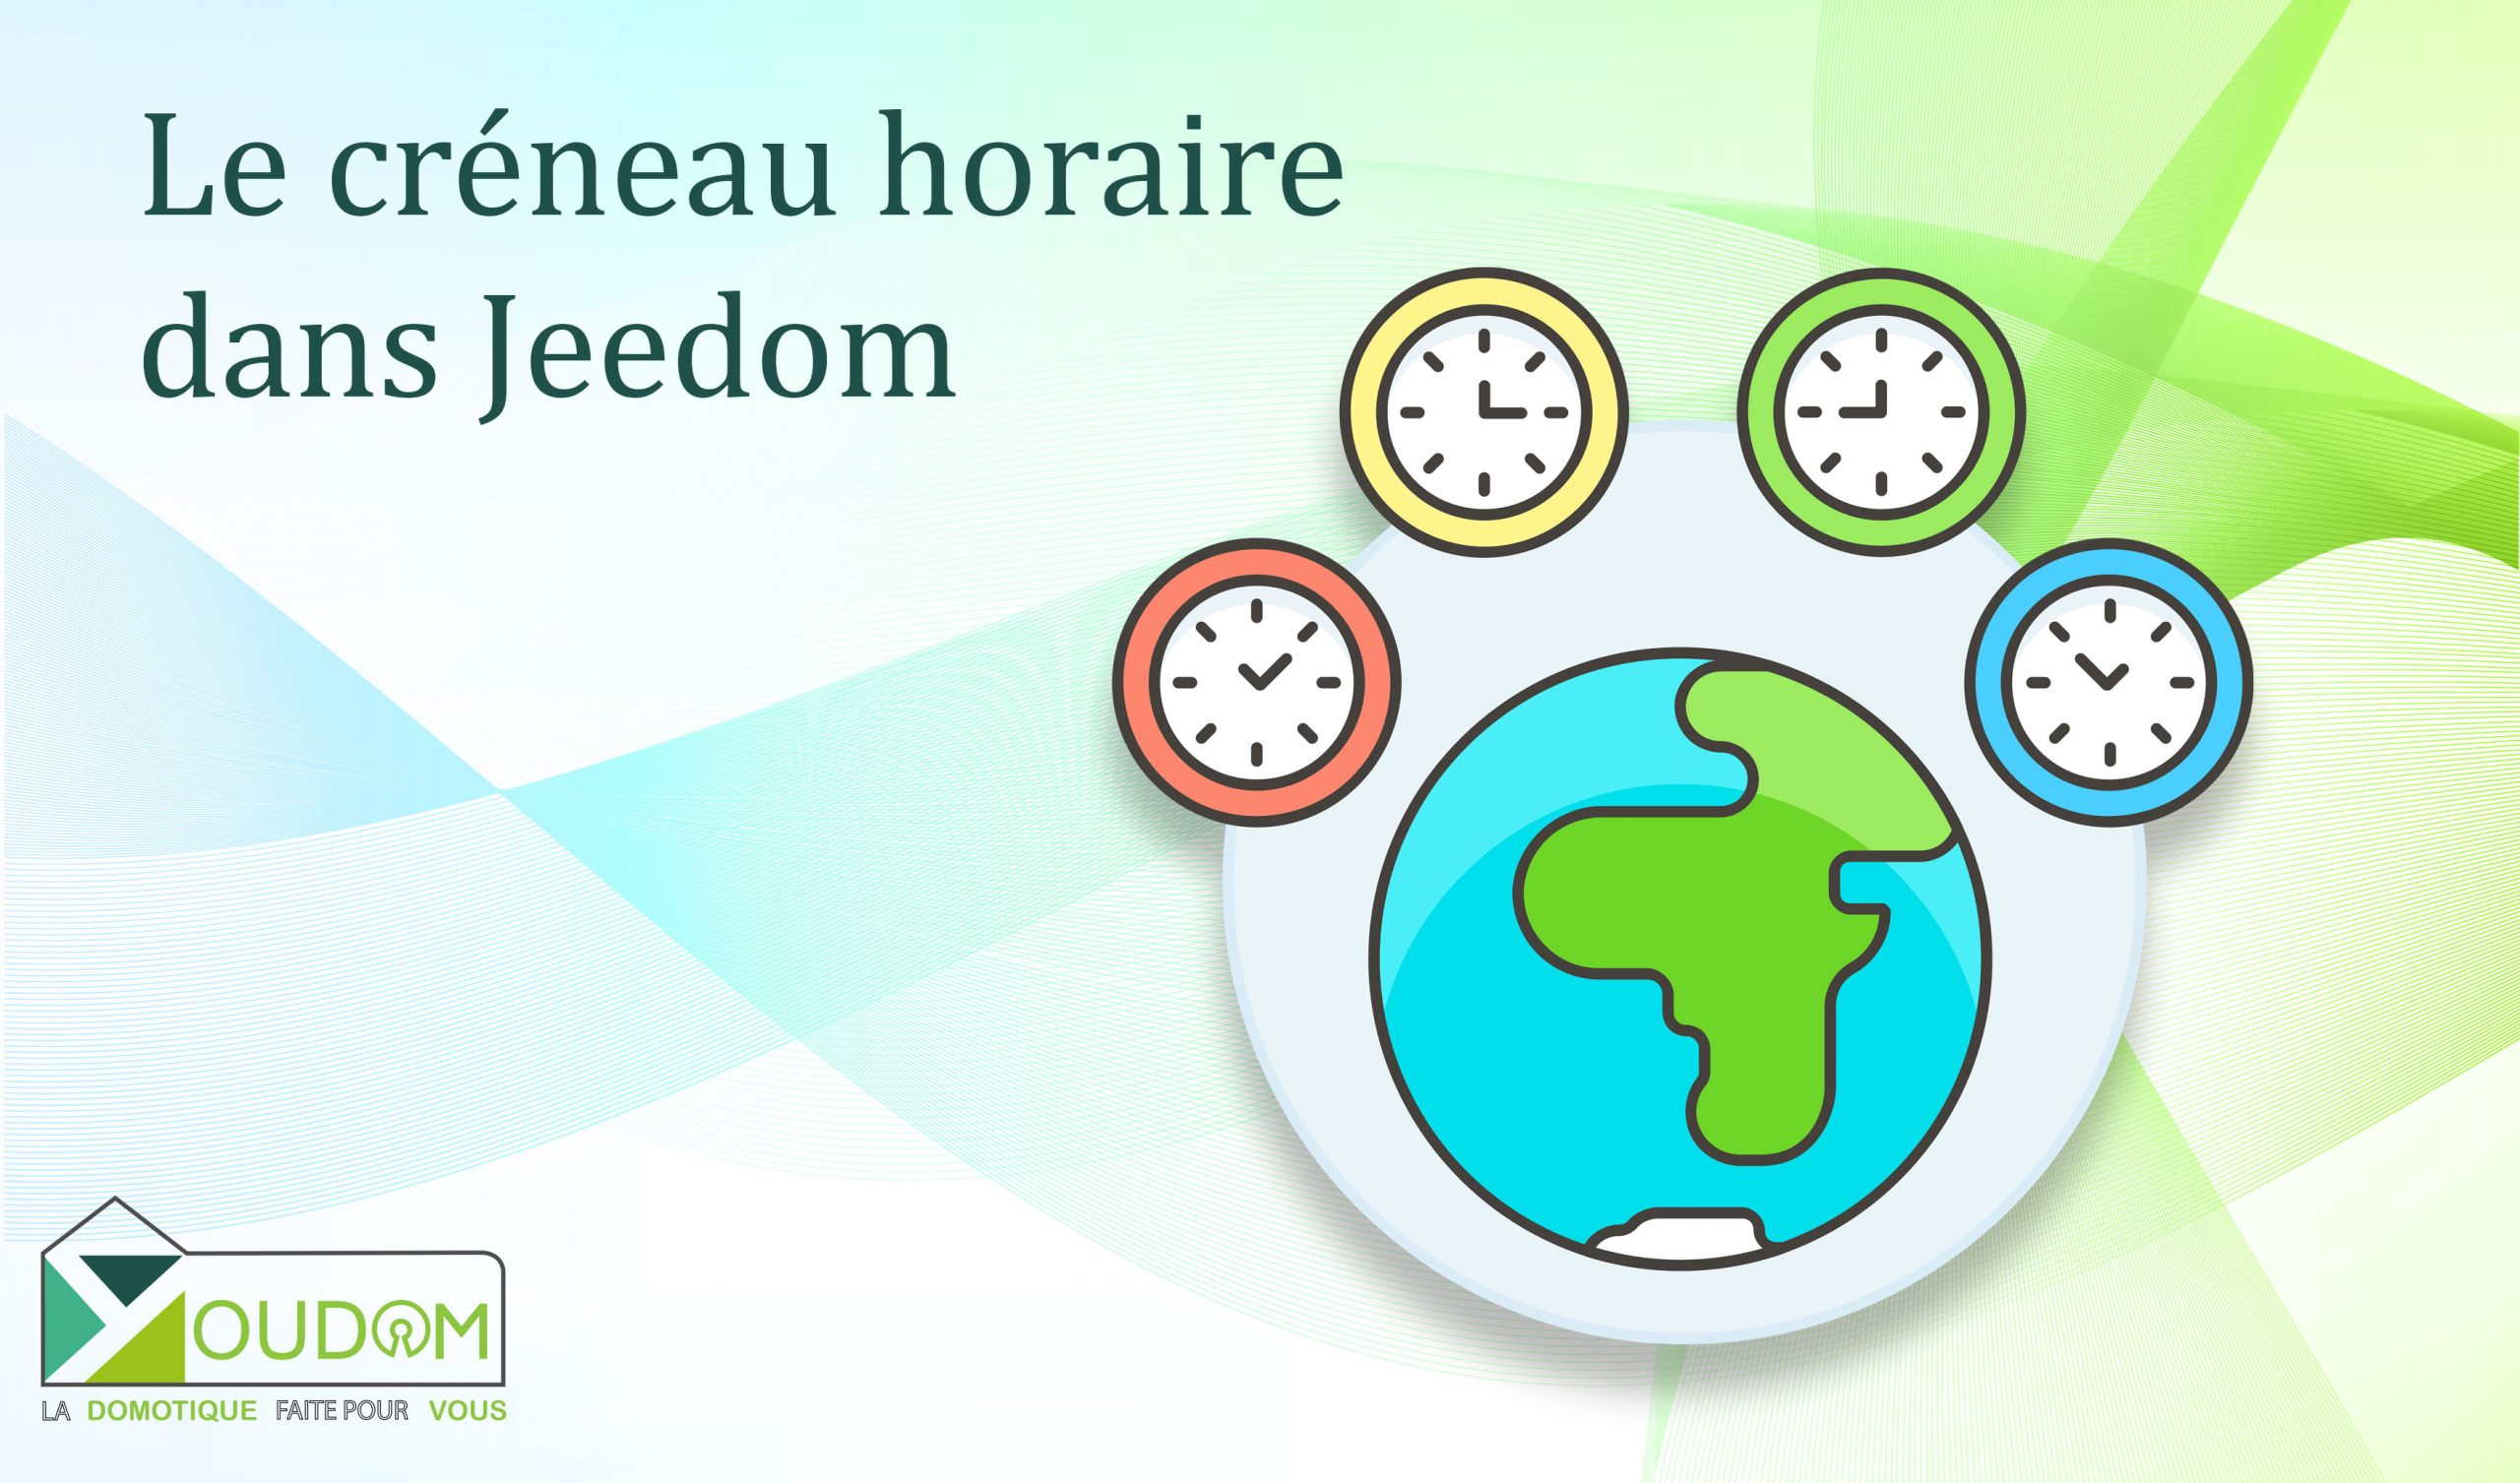 You are currently viewing Le créneau horaire dans Jeedom.